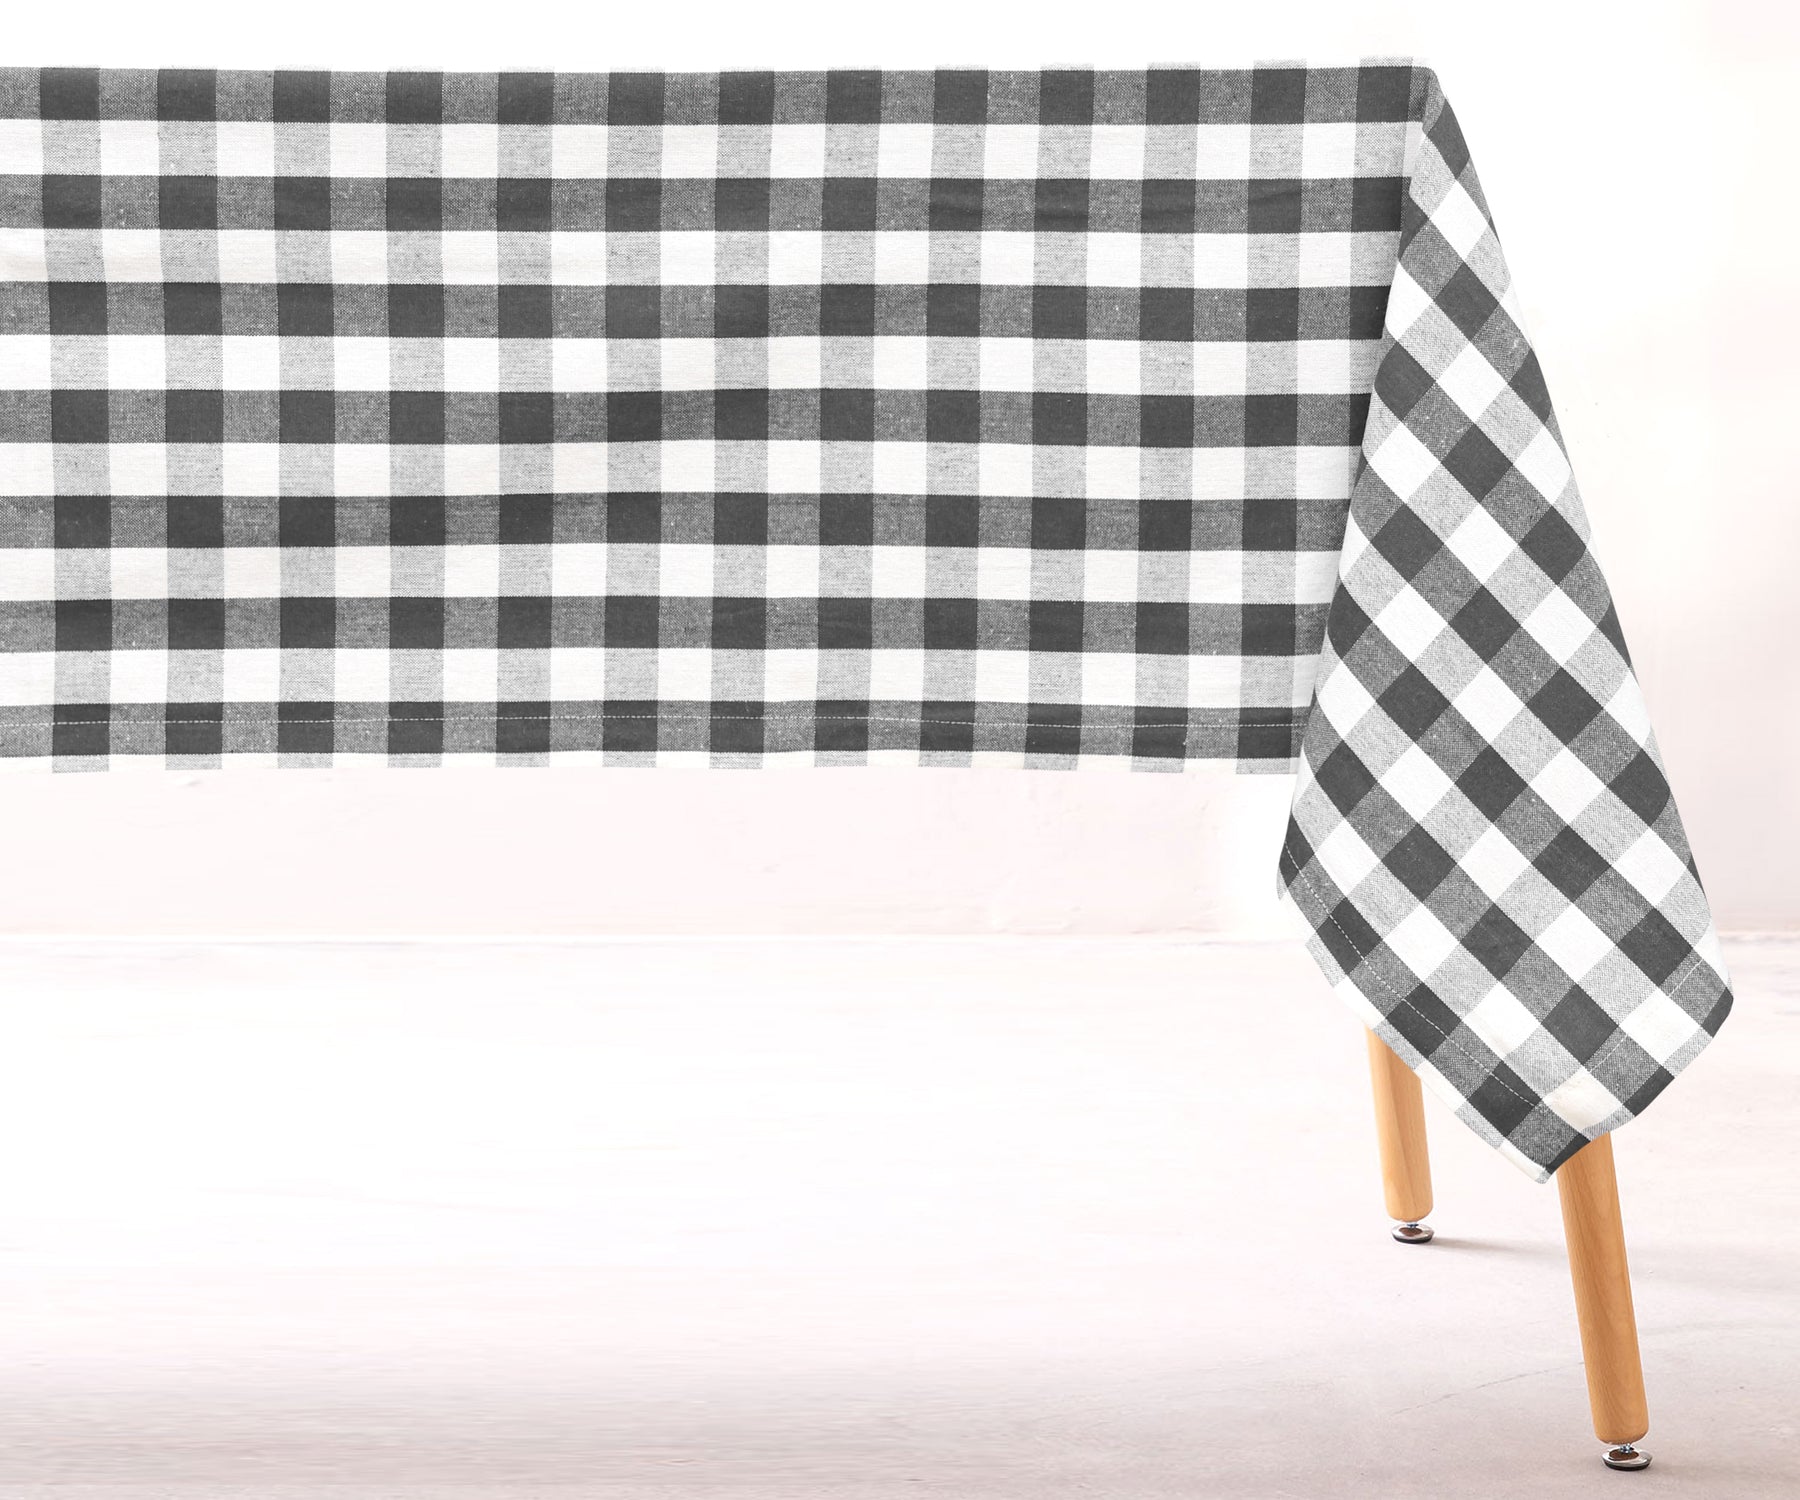 Stylish Gray Checkered Tablecloth - Contemporary Dining Appeal